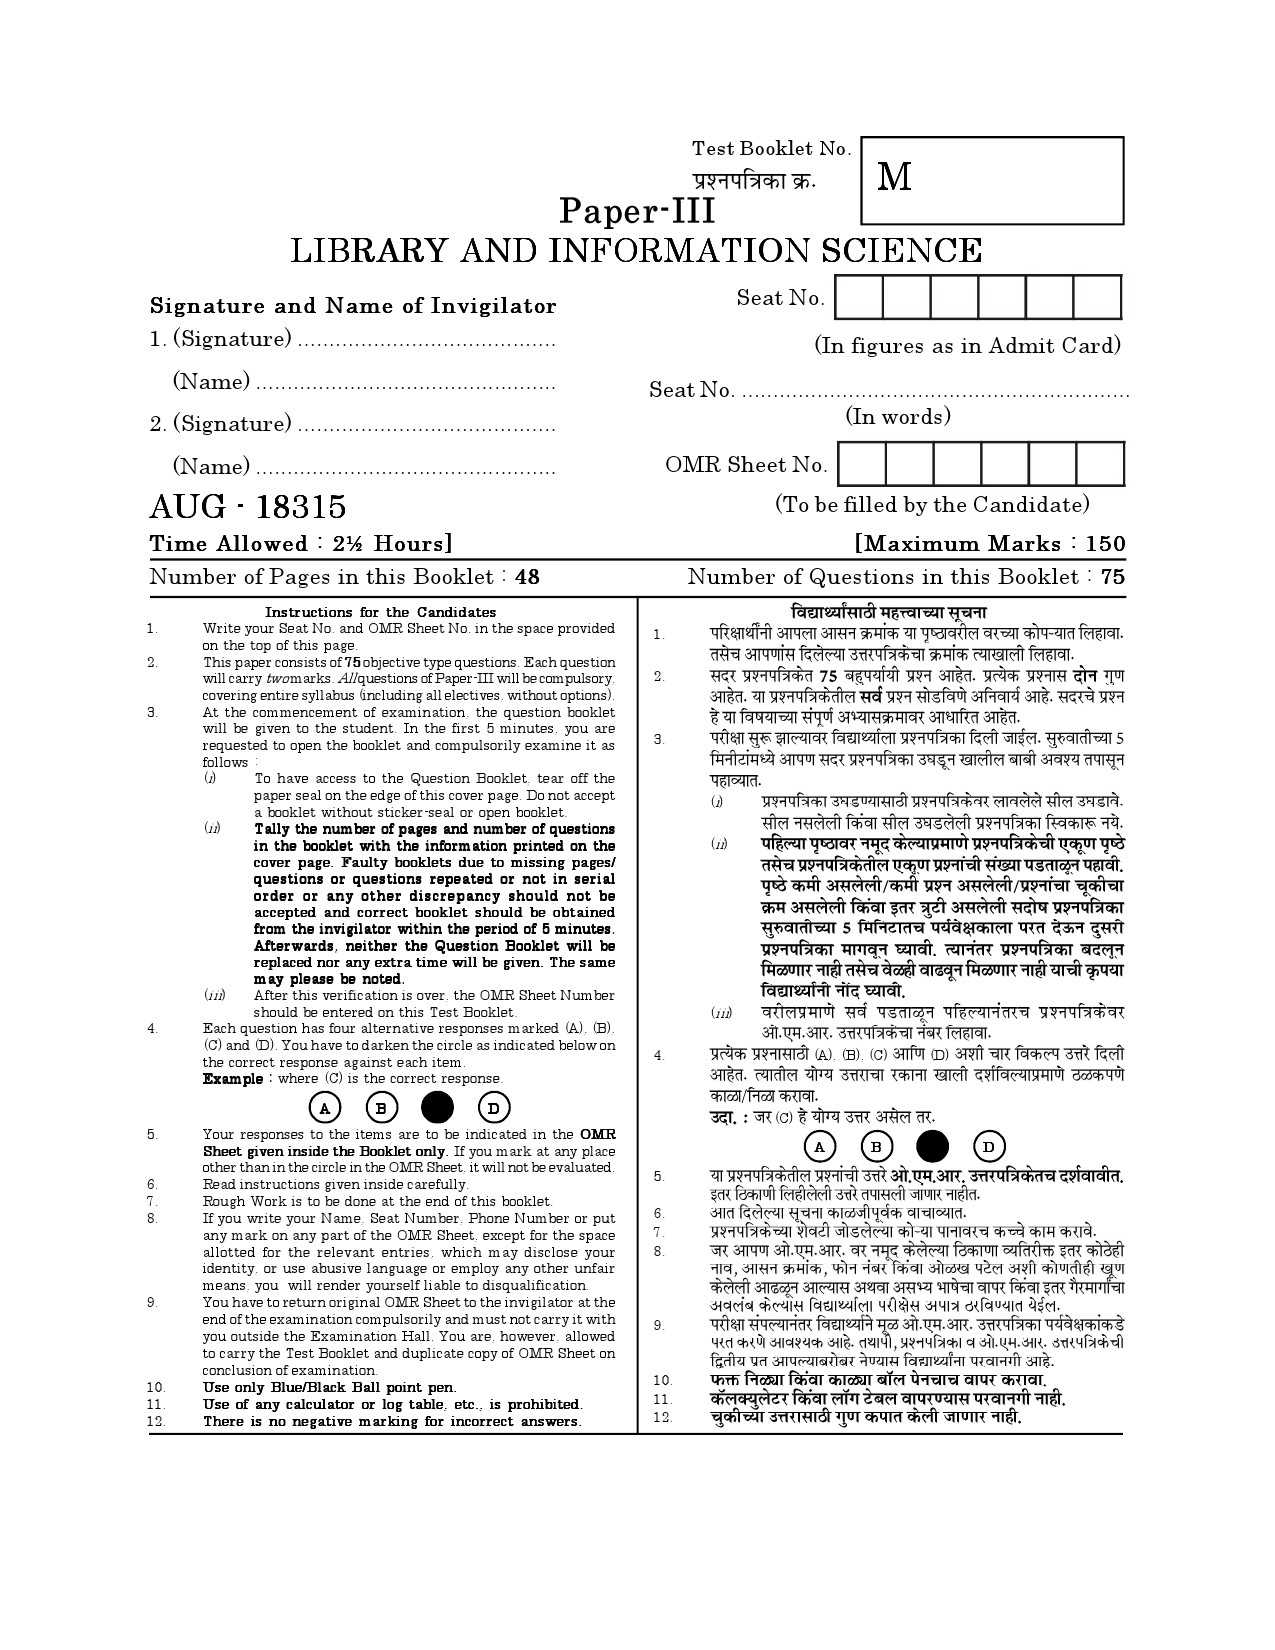 Maharashtra SET Library Information Science Question Paper III August 2015 1